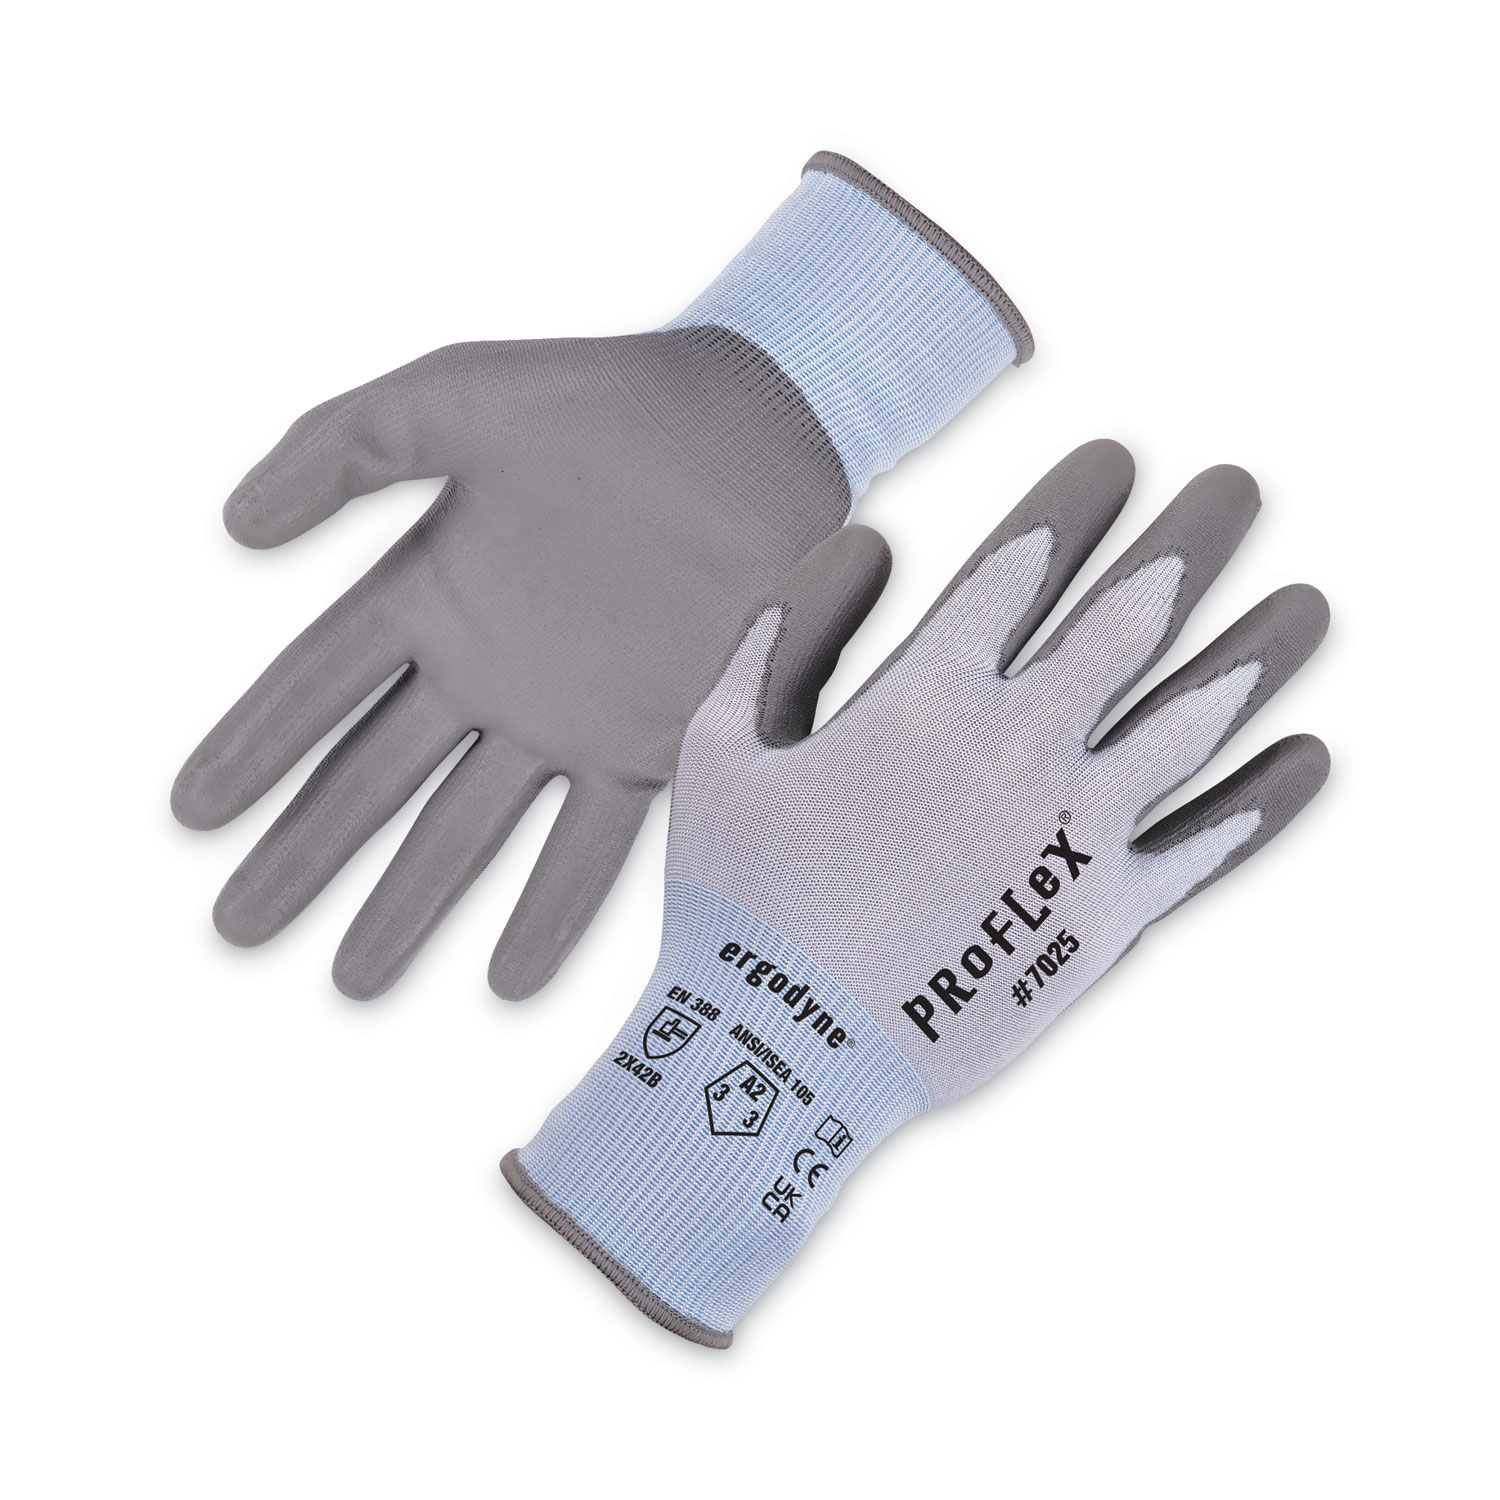 Security Protection Gloves, Cut Protection Gloves